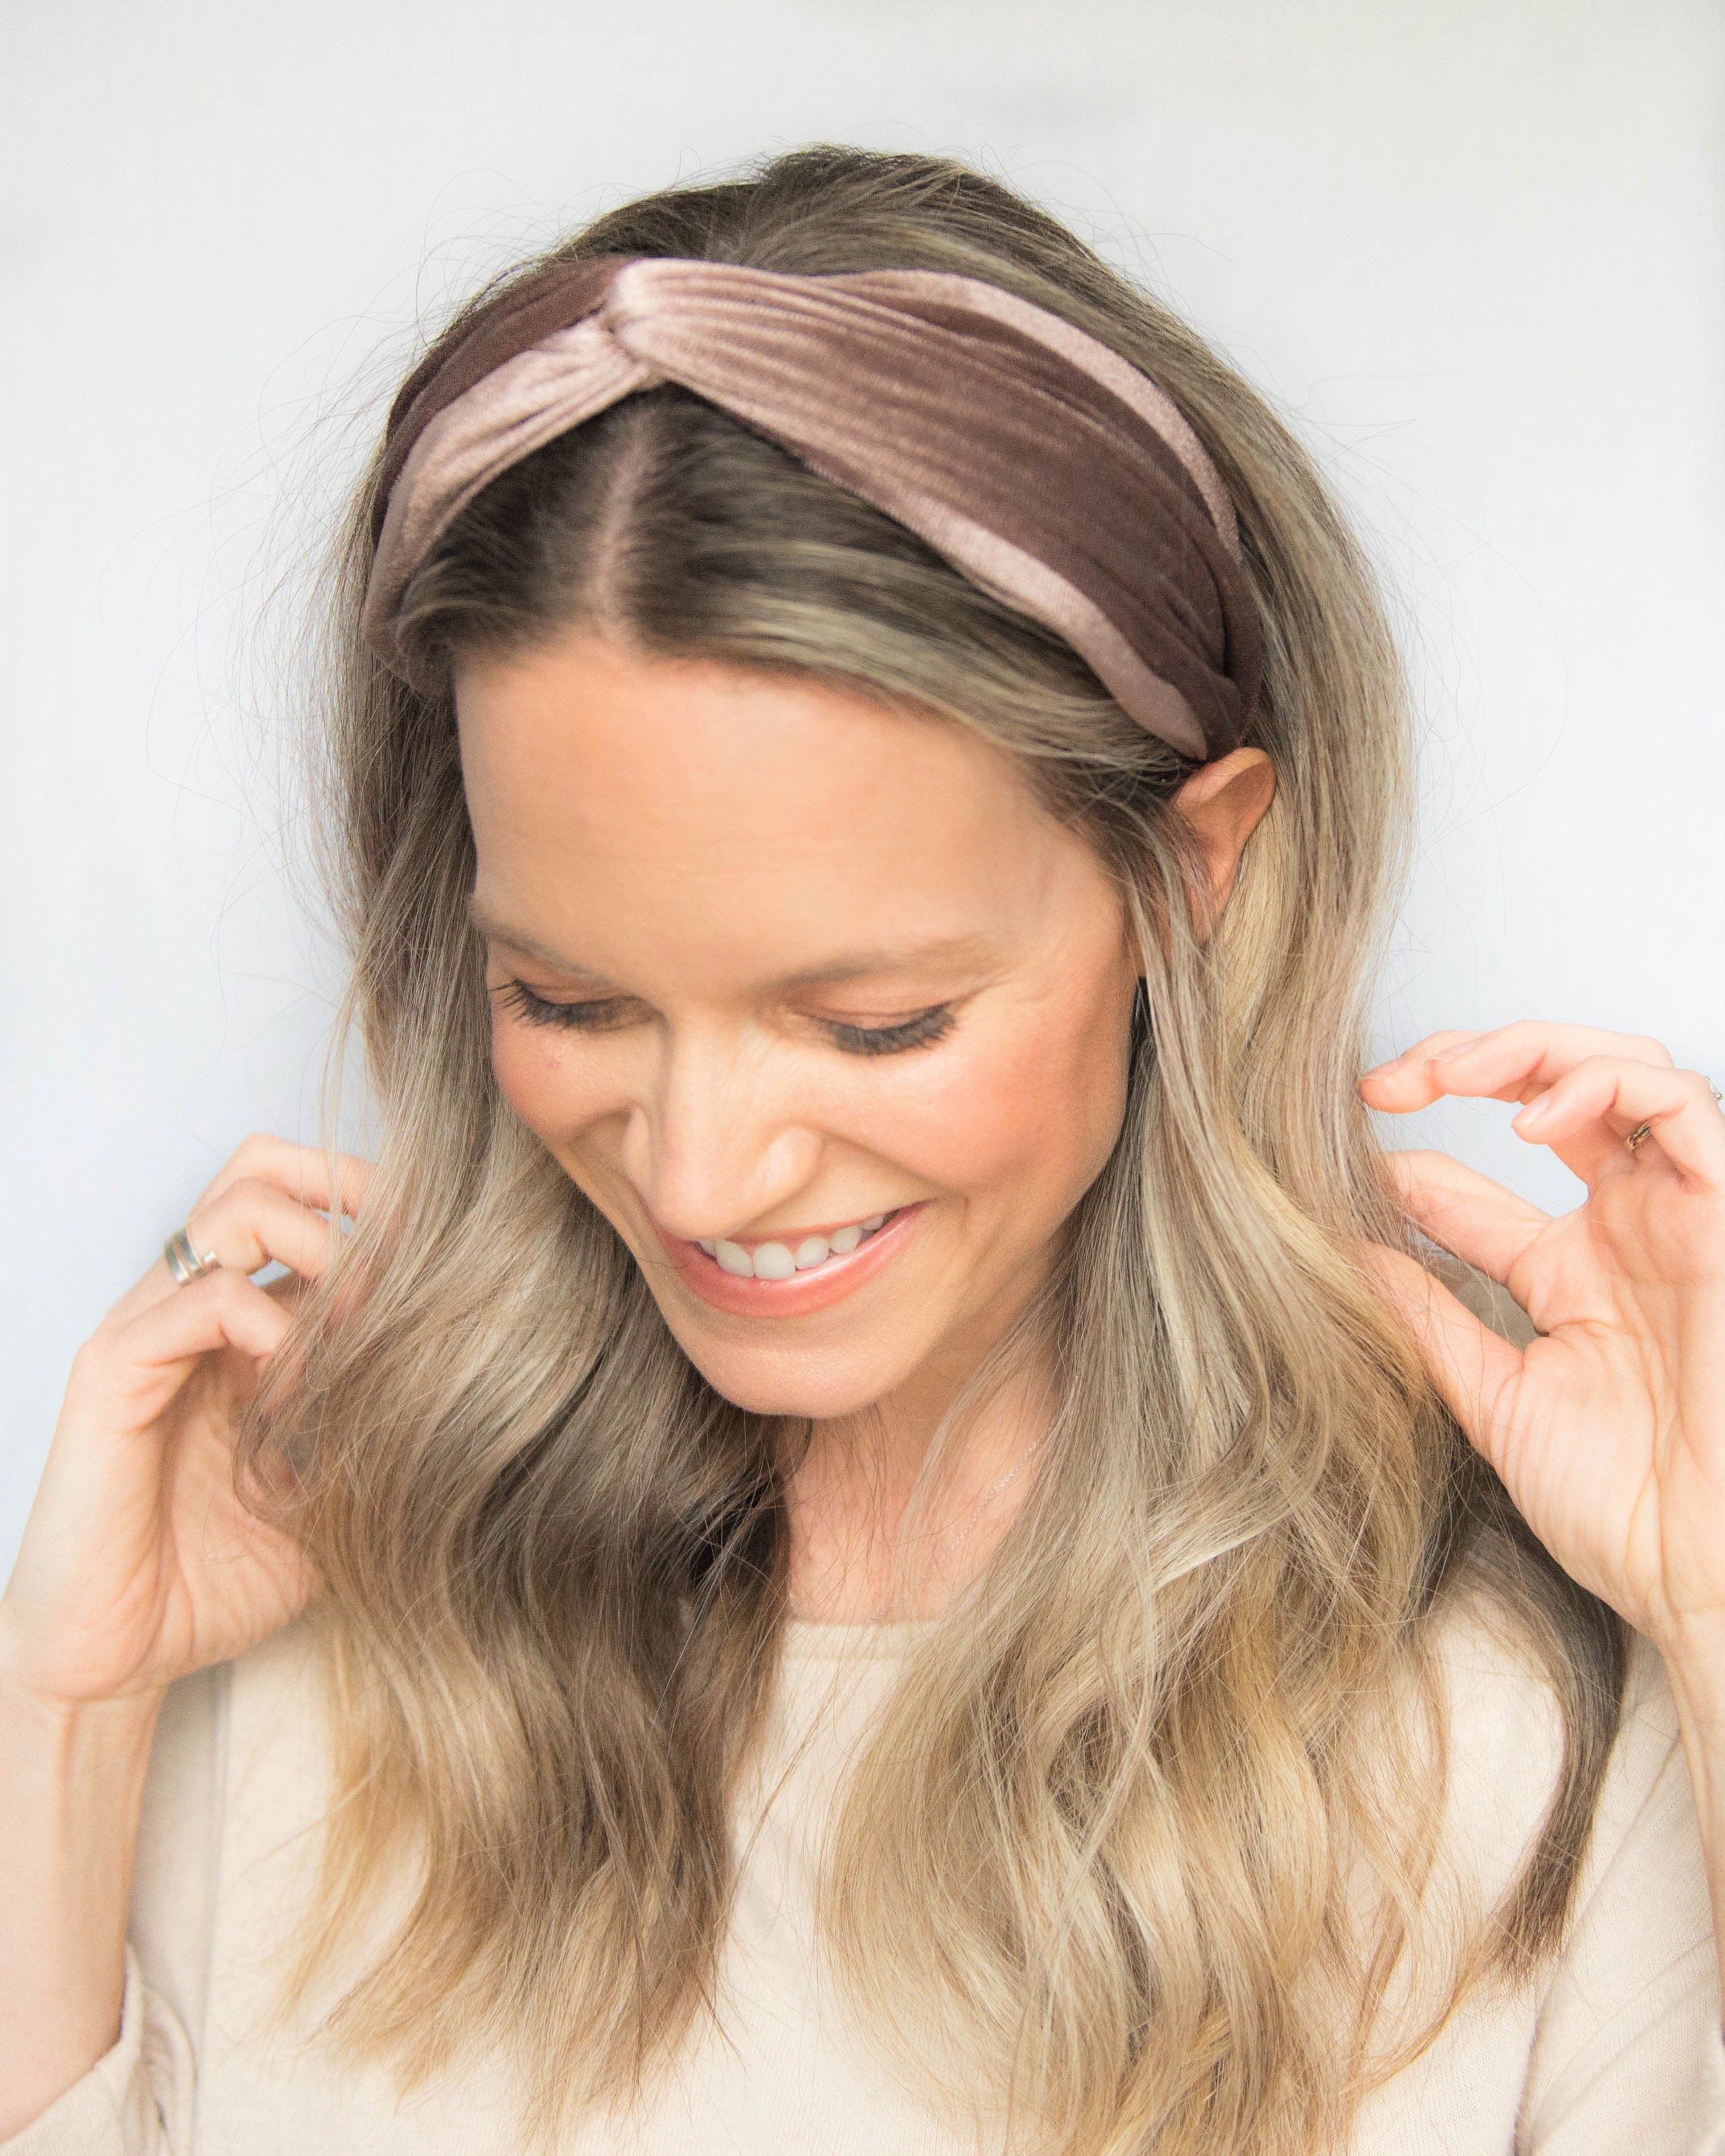 How To Wear A Headband: Effortless Hairstyles For Everyday - Lulus.com  Fashion Blog